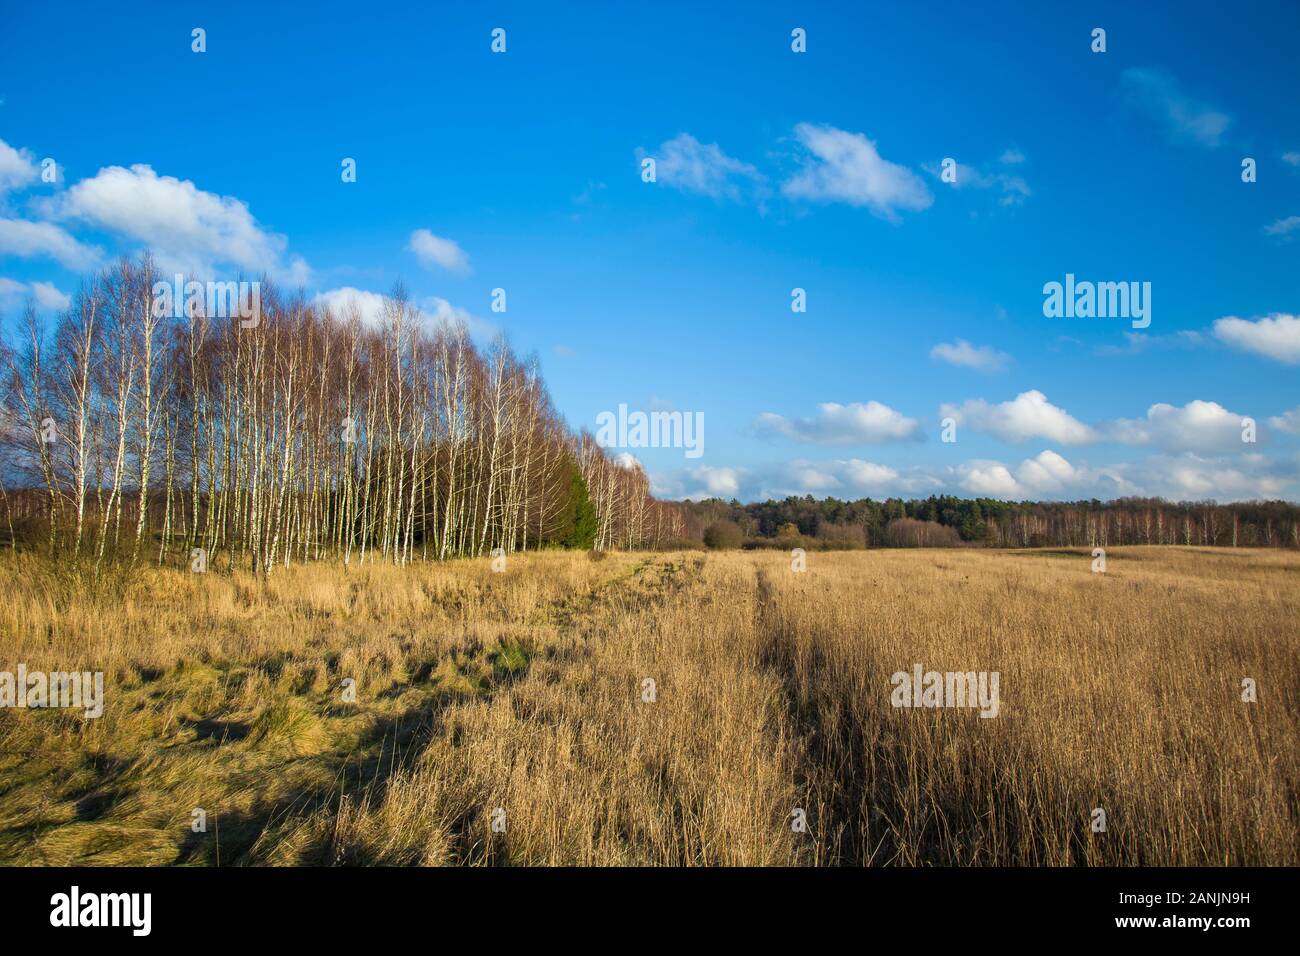 Tall and dry grass on the field, trees and blue sky Stock Photo